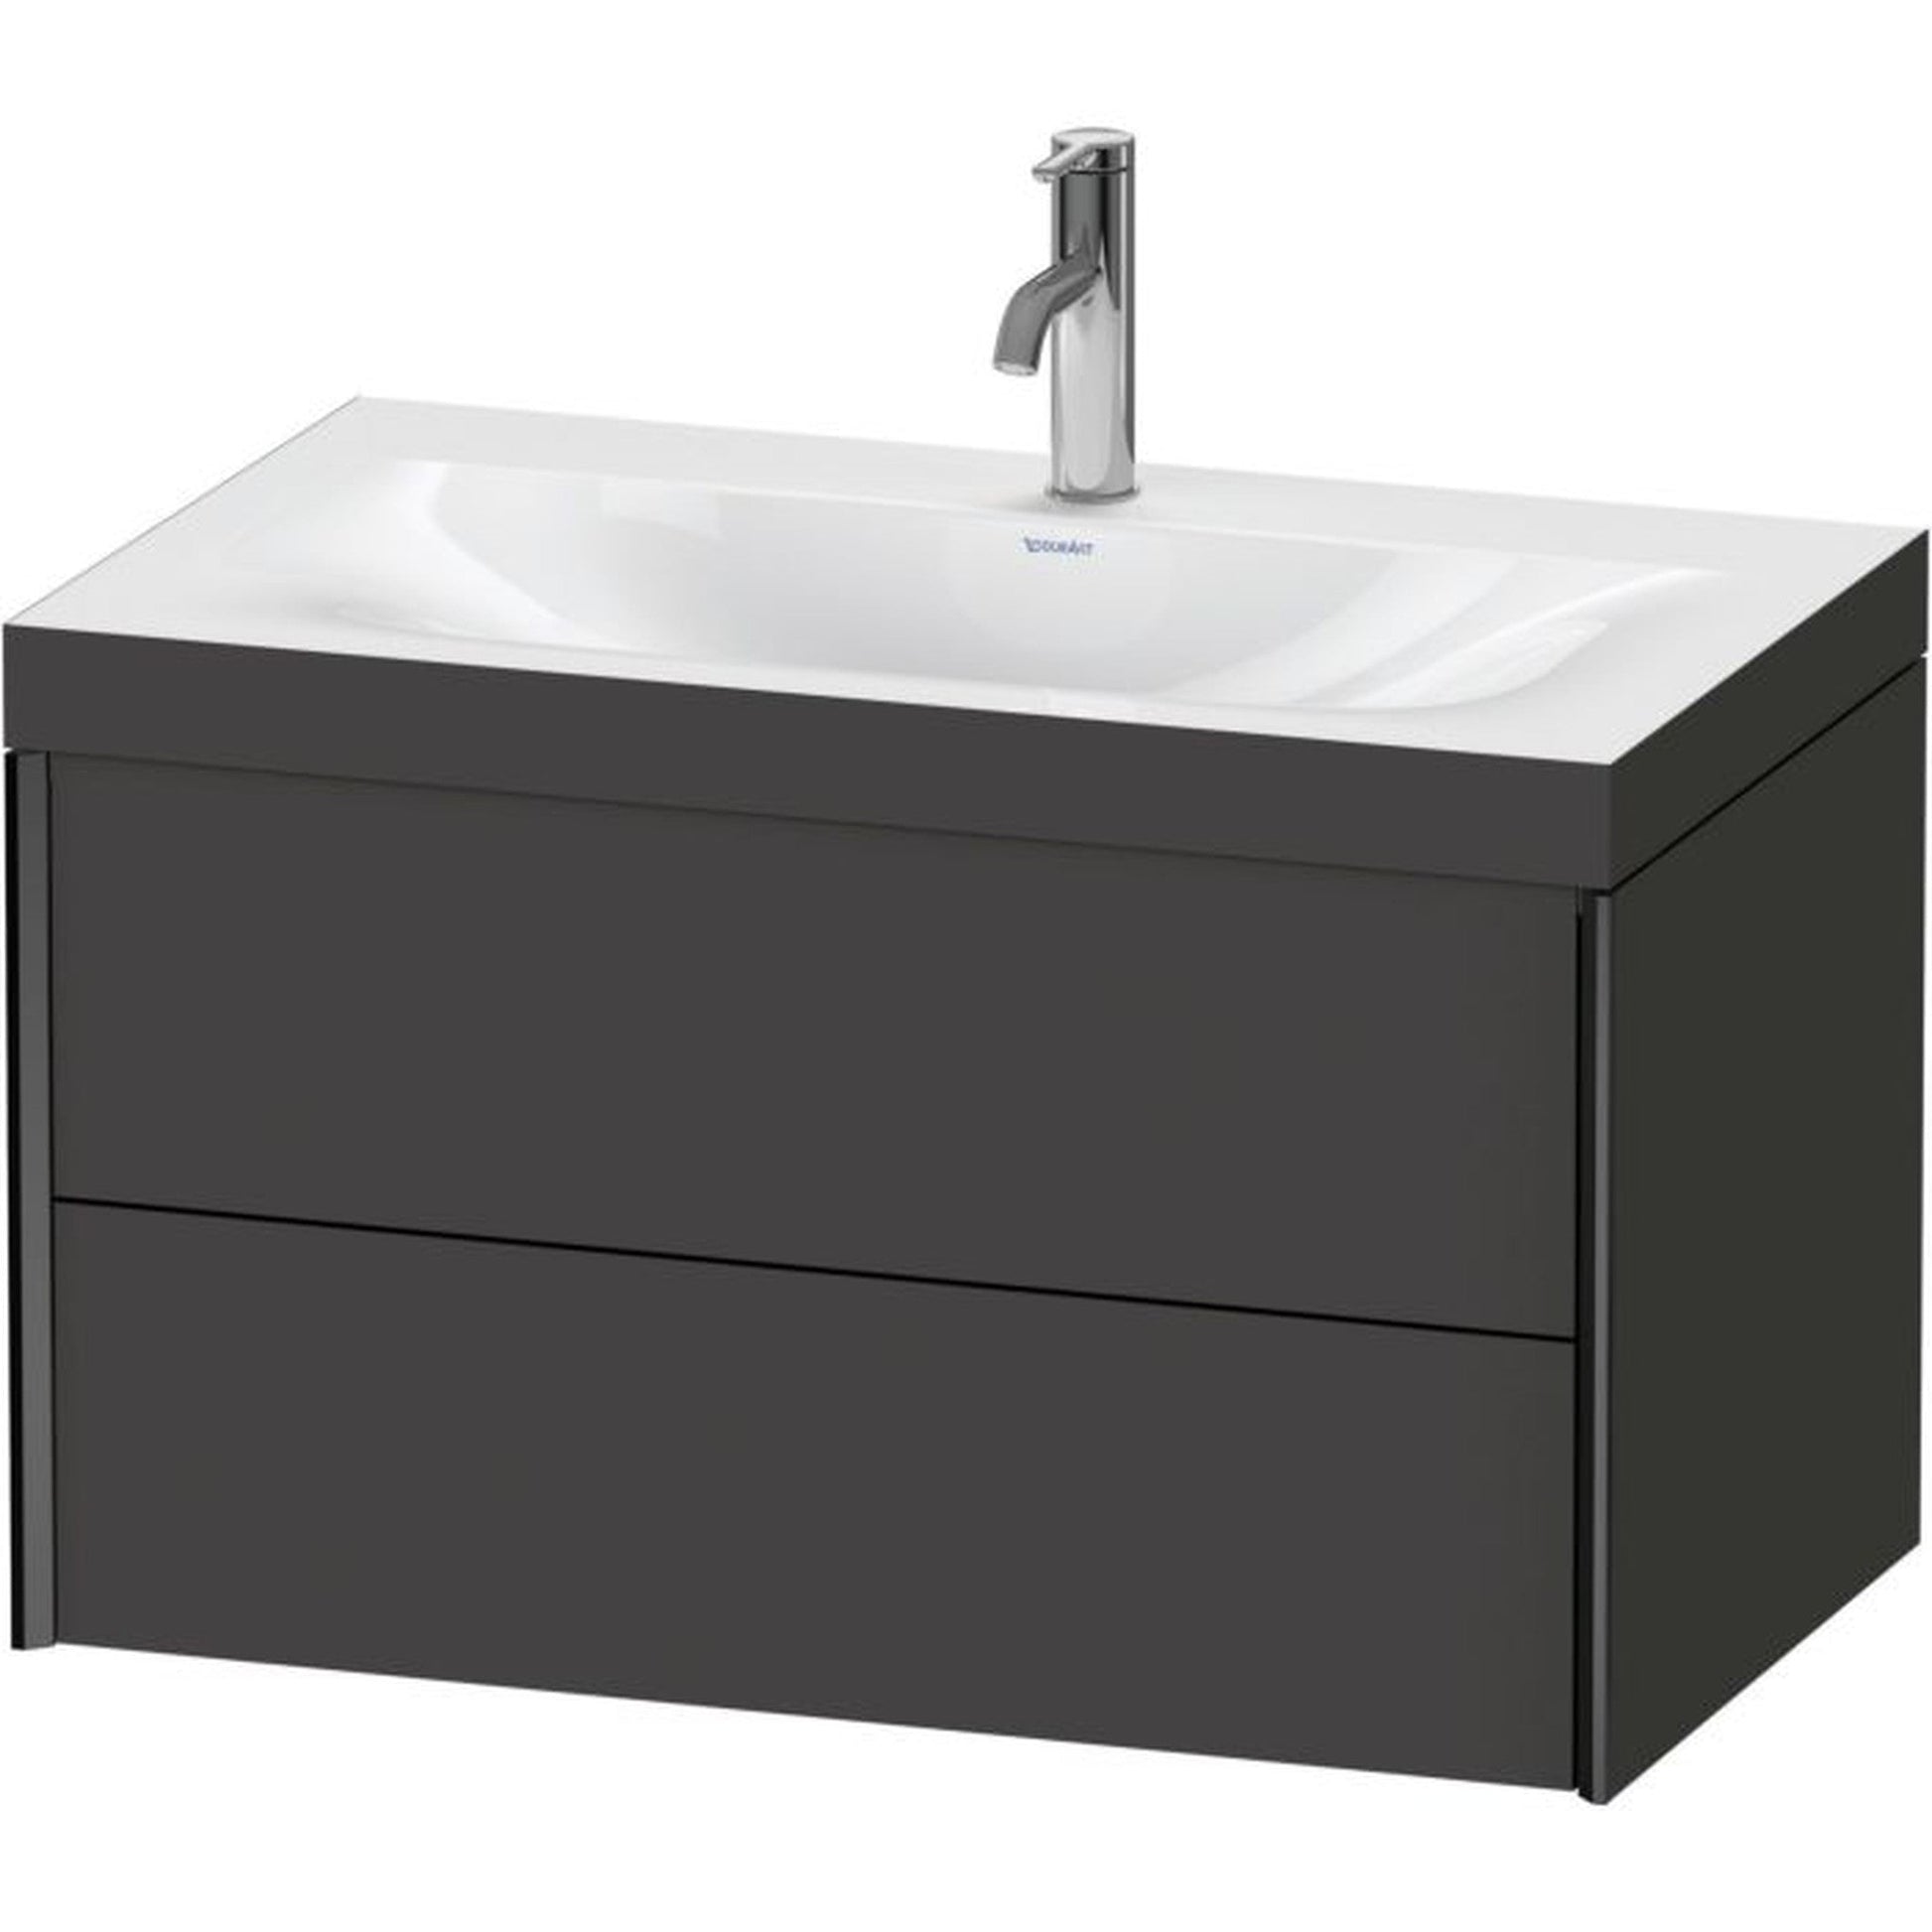 Duravit Xviu 31" x 20" x 19" Two Drawer C-Bonded Wall-Mount Vanity Kit With One Tap Hole, Graphite (XV4615OB280C)